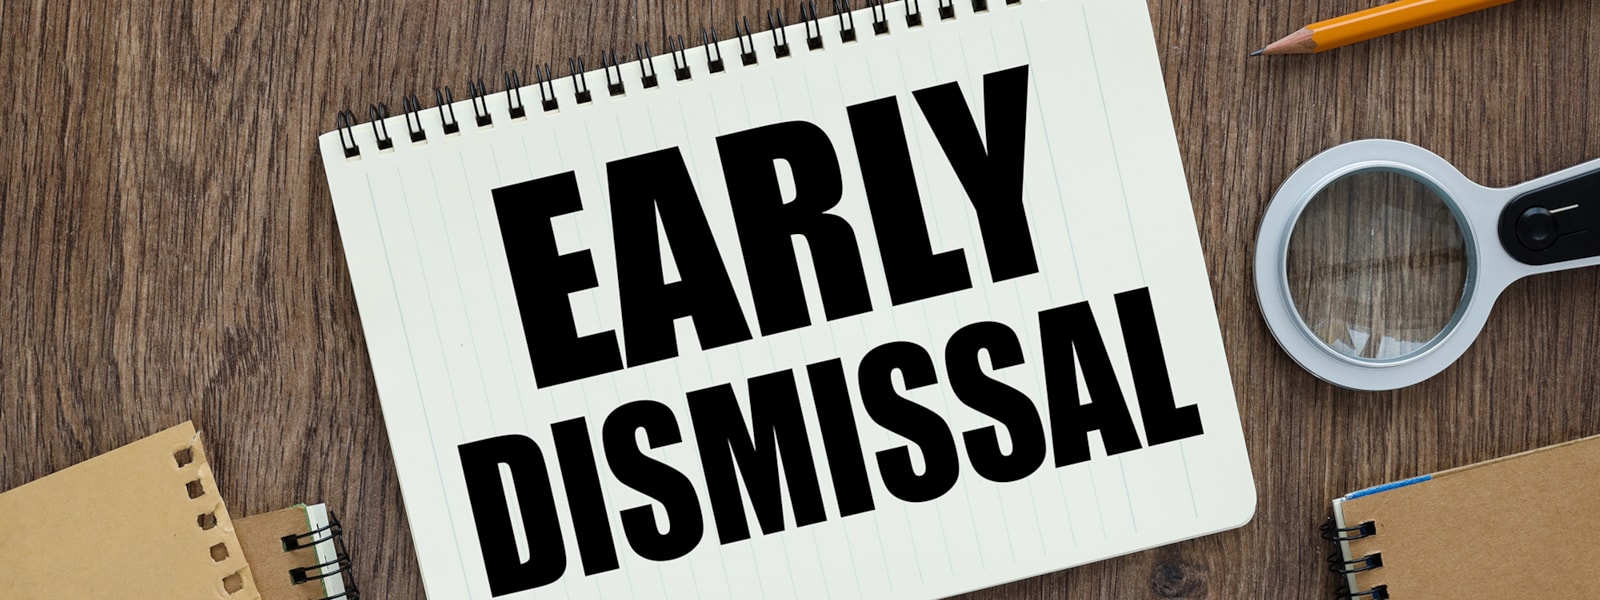 'early dismissal' on a notebook with magnifying glass and pencil next to it